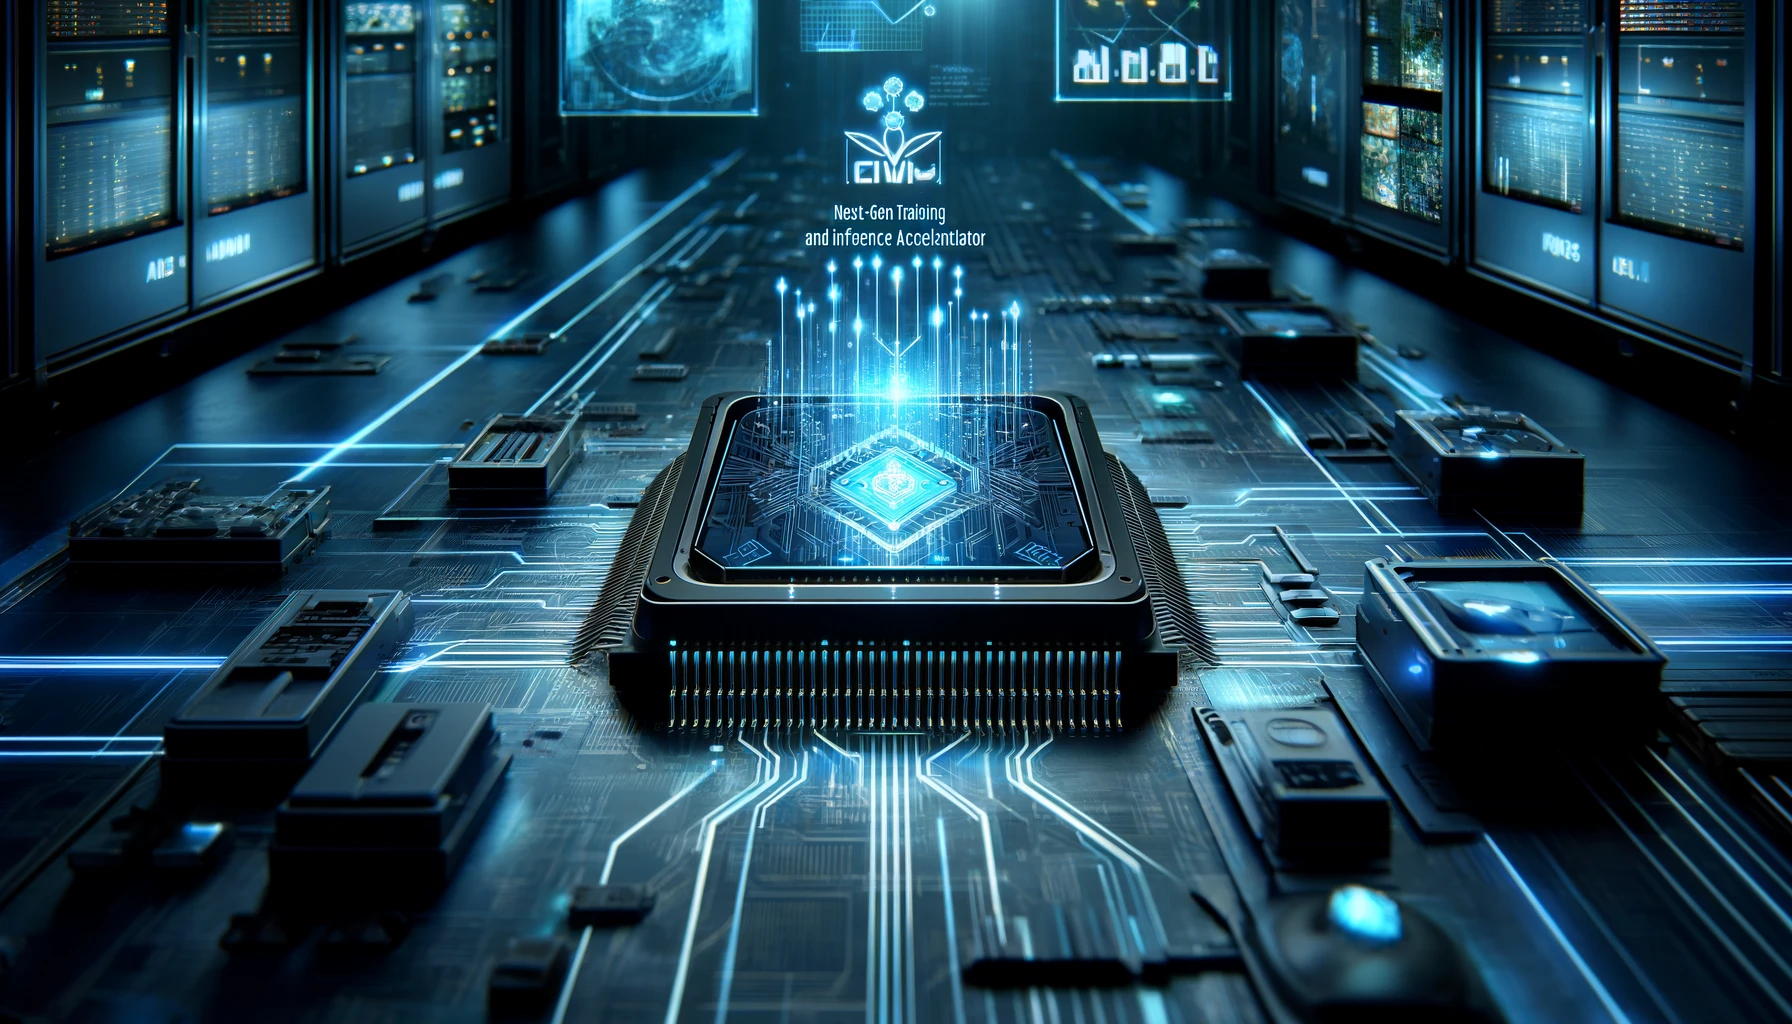 Next-Gen Training and Inference Accelerator Chip